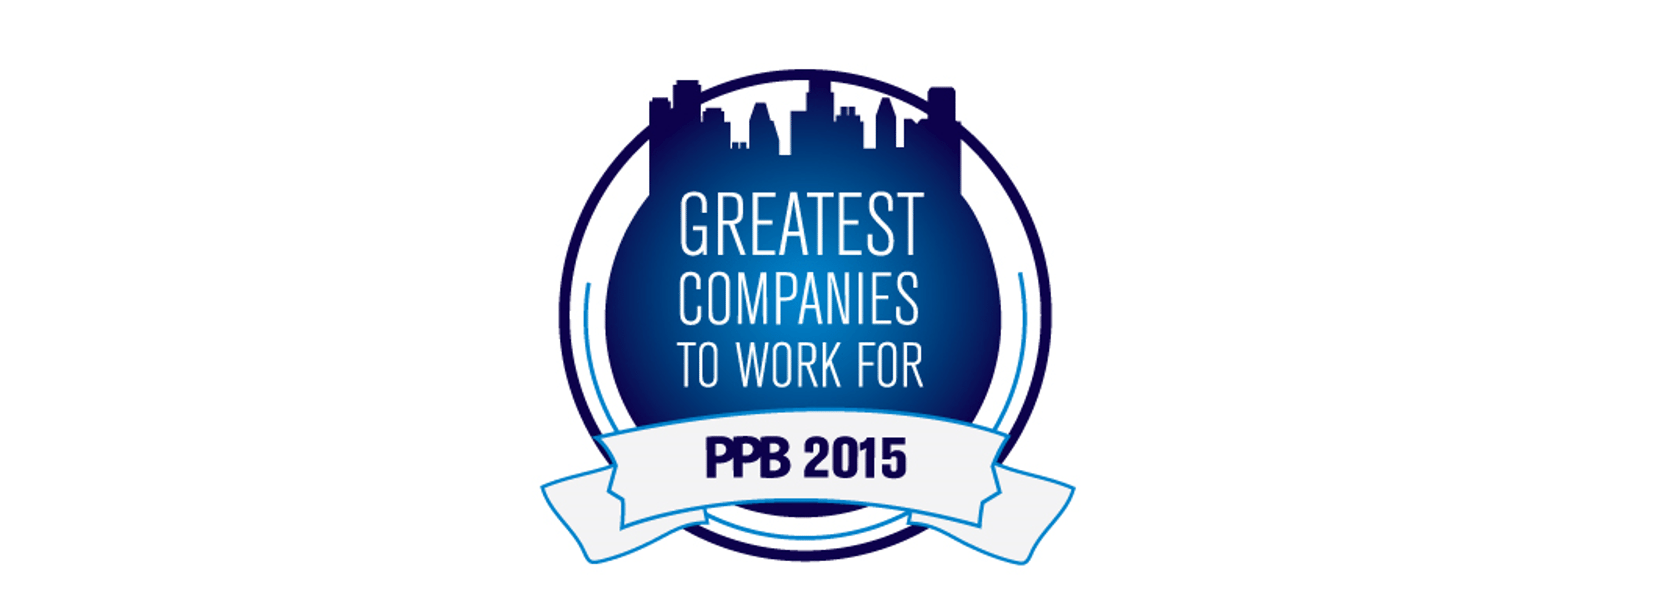 PPB 2015: Greatest Companies to Work For